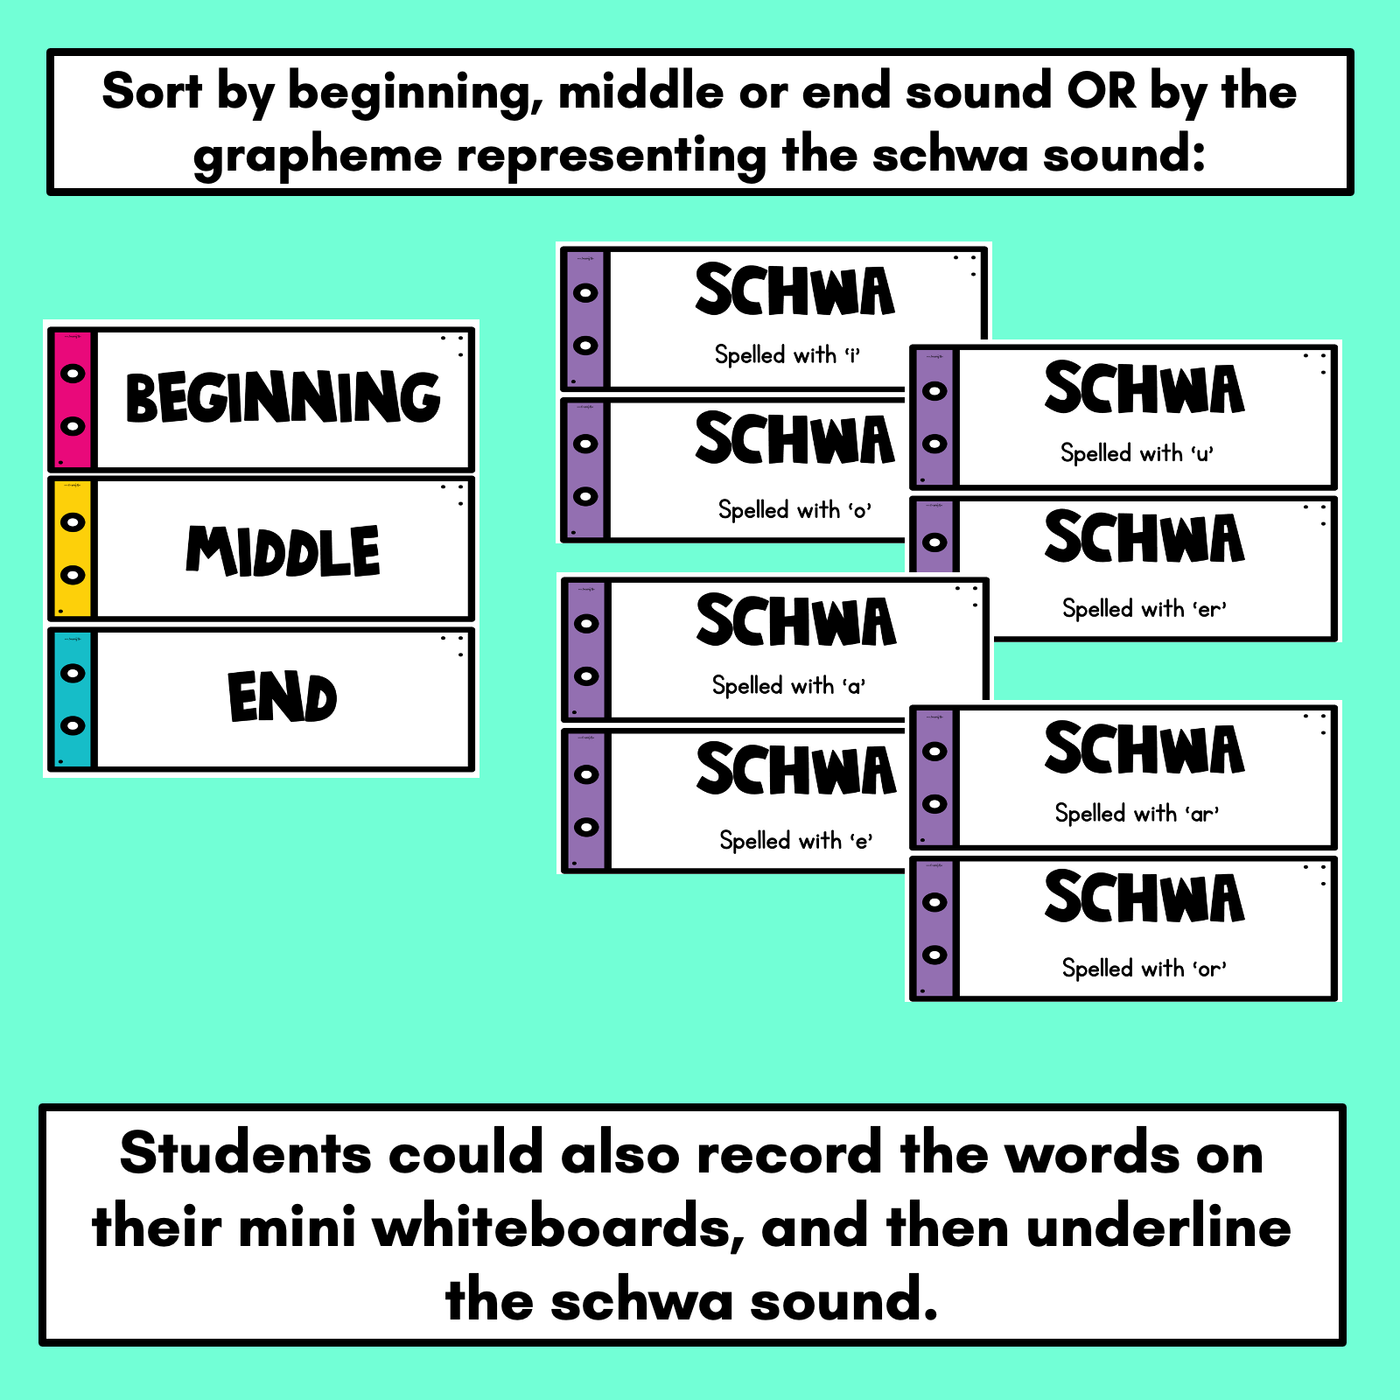 Schwa Activity - Word and Picture Sort for Schwa Words